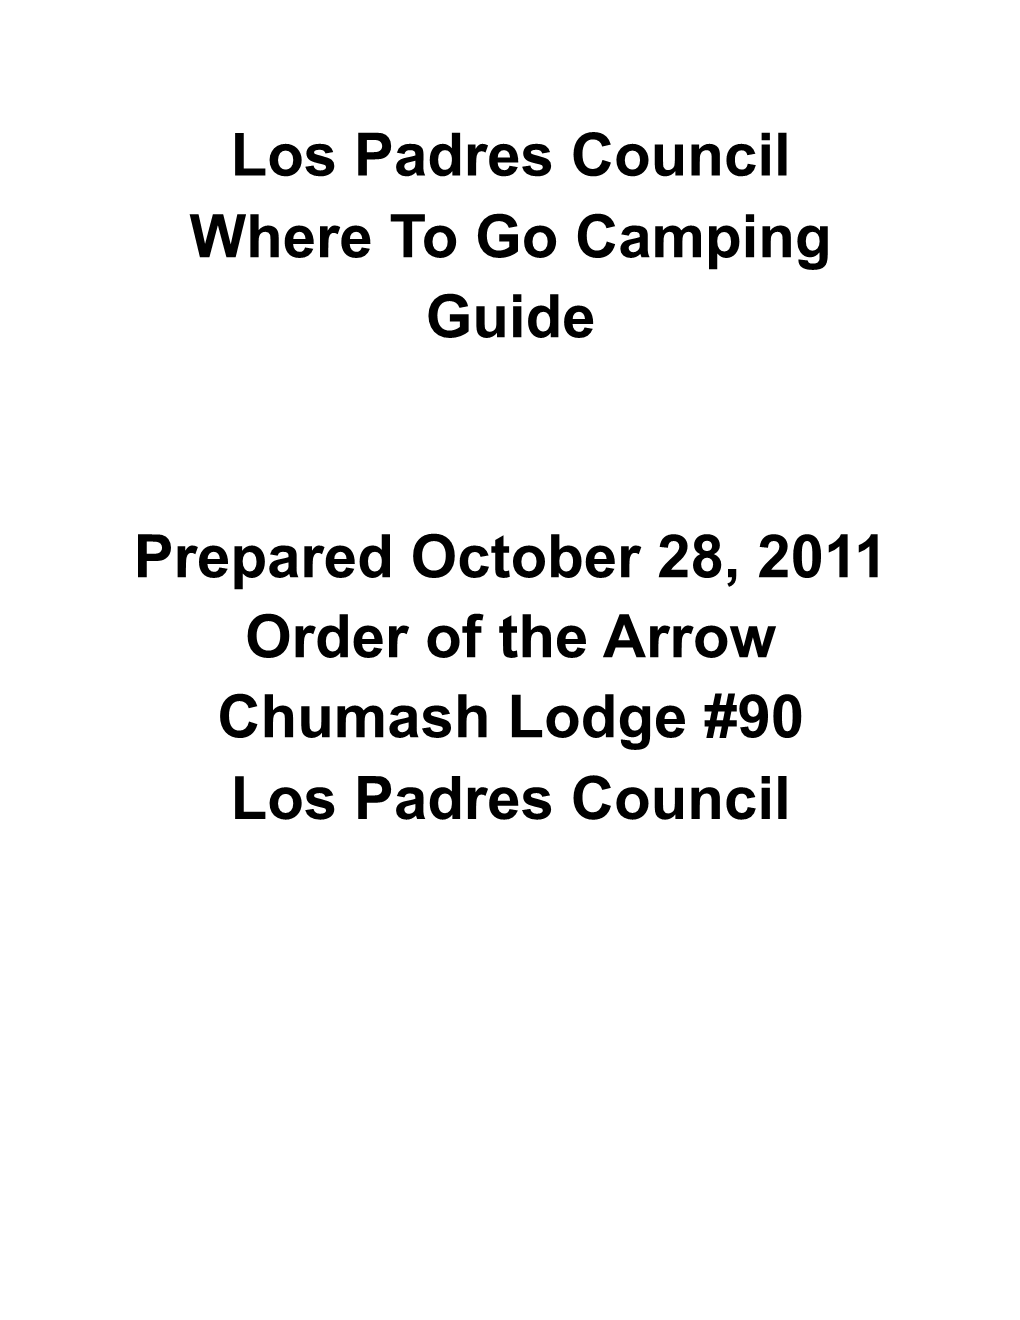 Los Padres Council Where to Go Camping Guide Prepared October